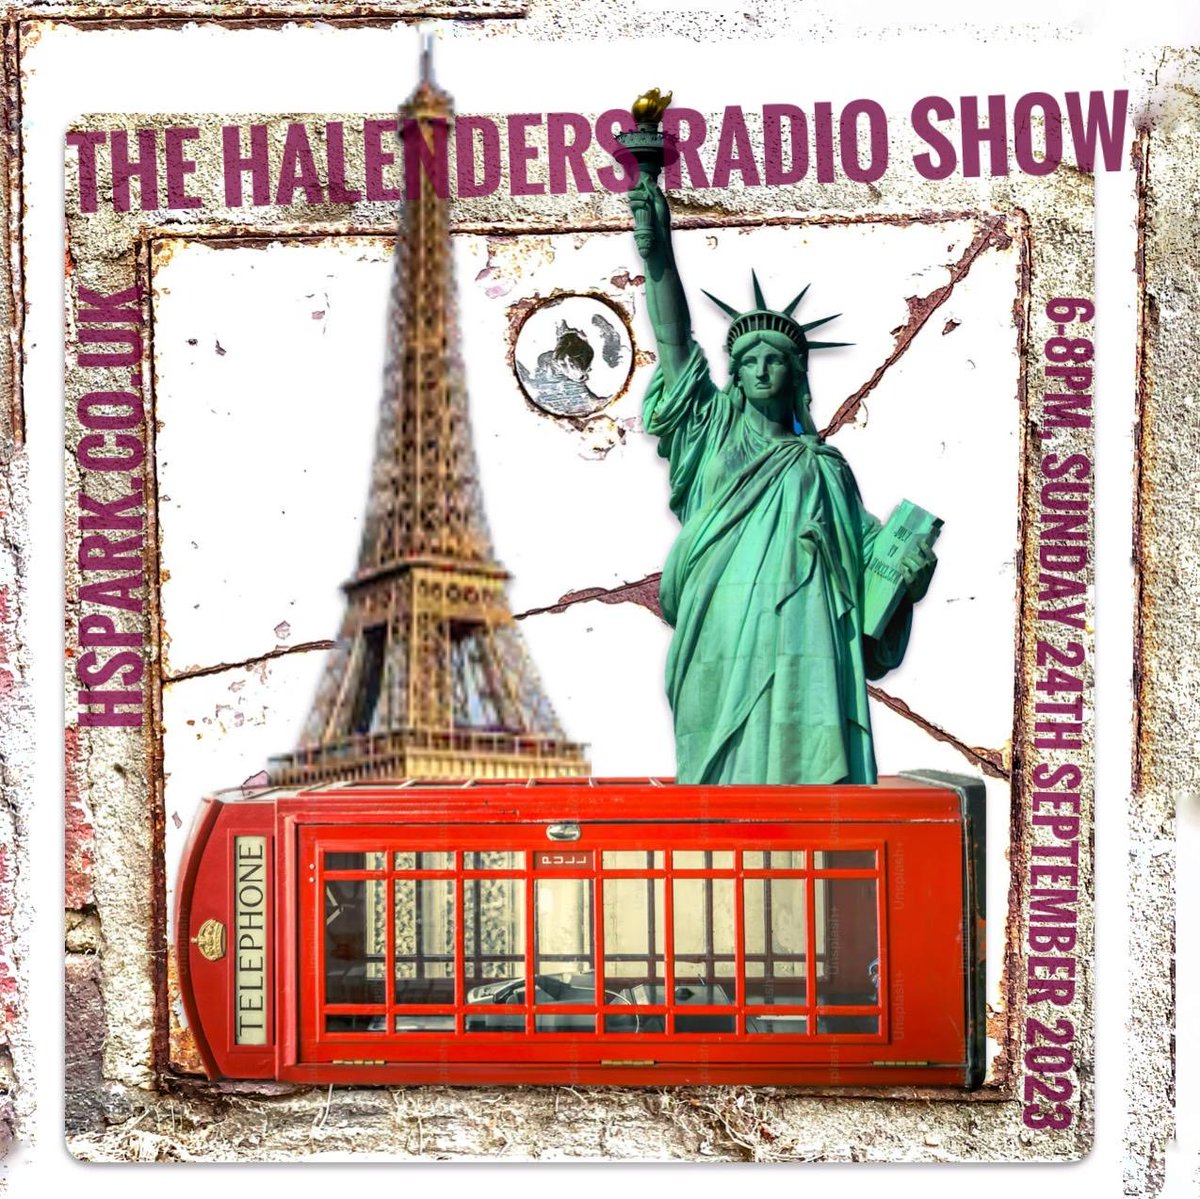 In my live Halenders Radio Show, I'll be delving into the concept of 'London, Paris, New York' via carefully chosen songs by: Corduroy, Blur, Metric, The Smiths, Yardbirds, Pogues, ELO, Chilly Gonzales, Paloma Faith, Billie Holiday & more. All from 6-8pm tonight!